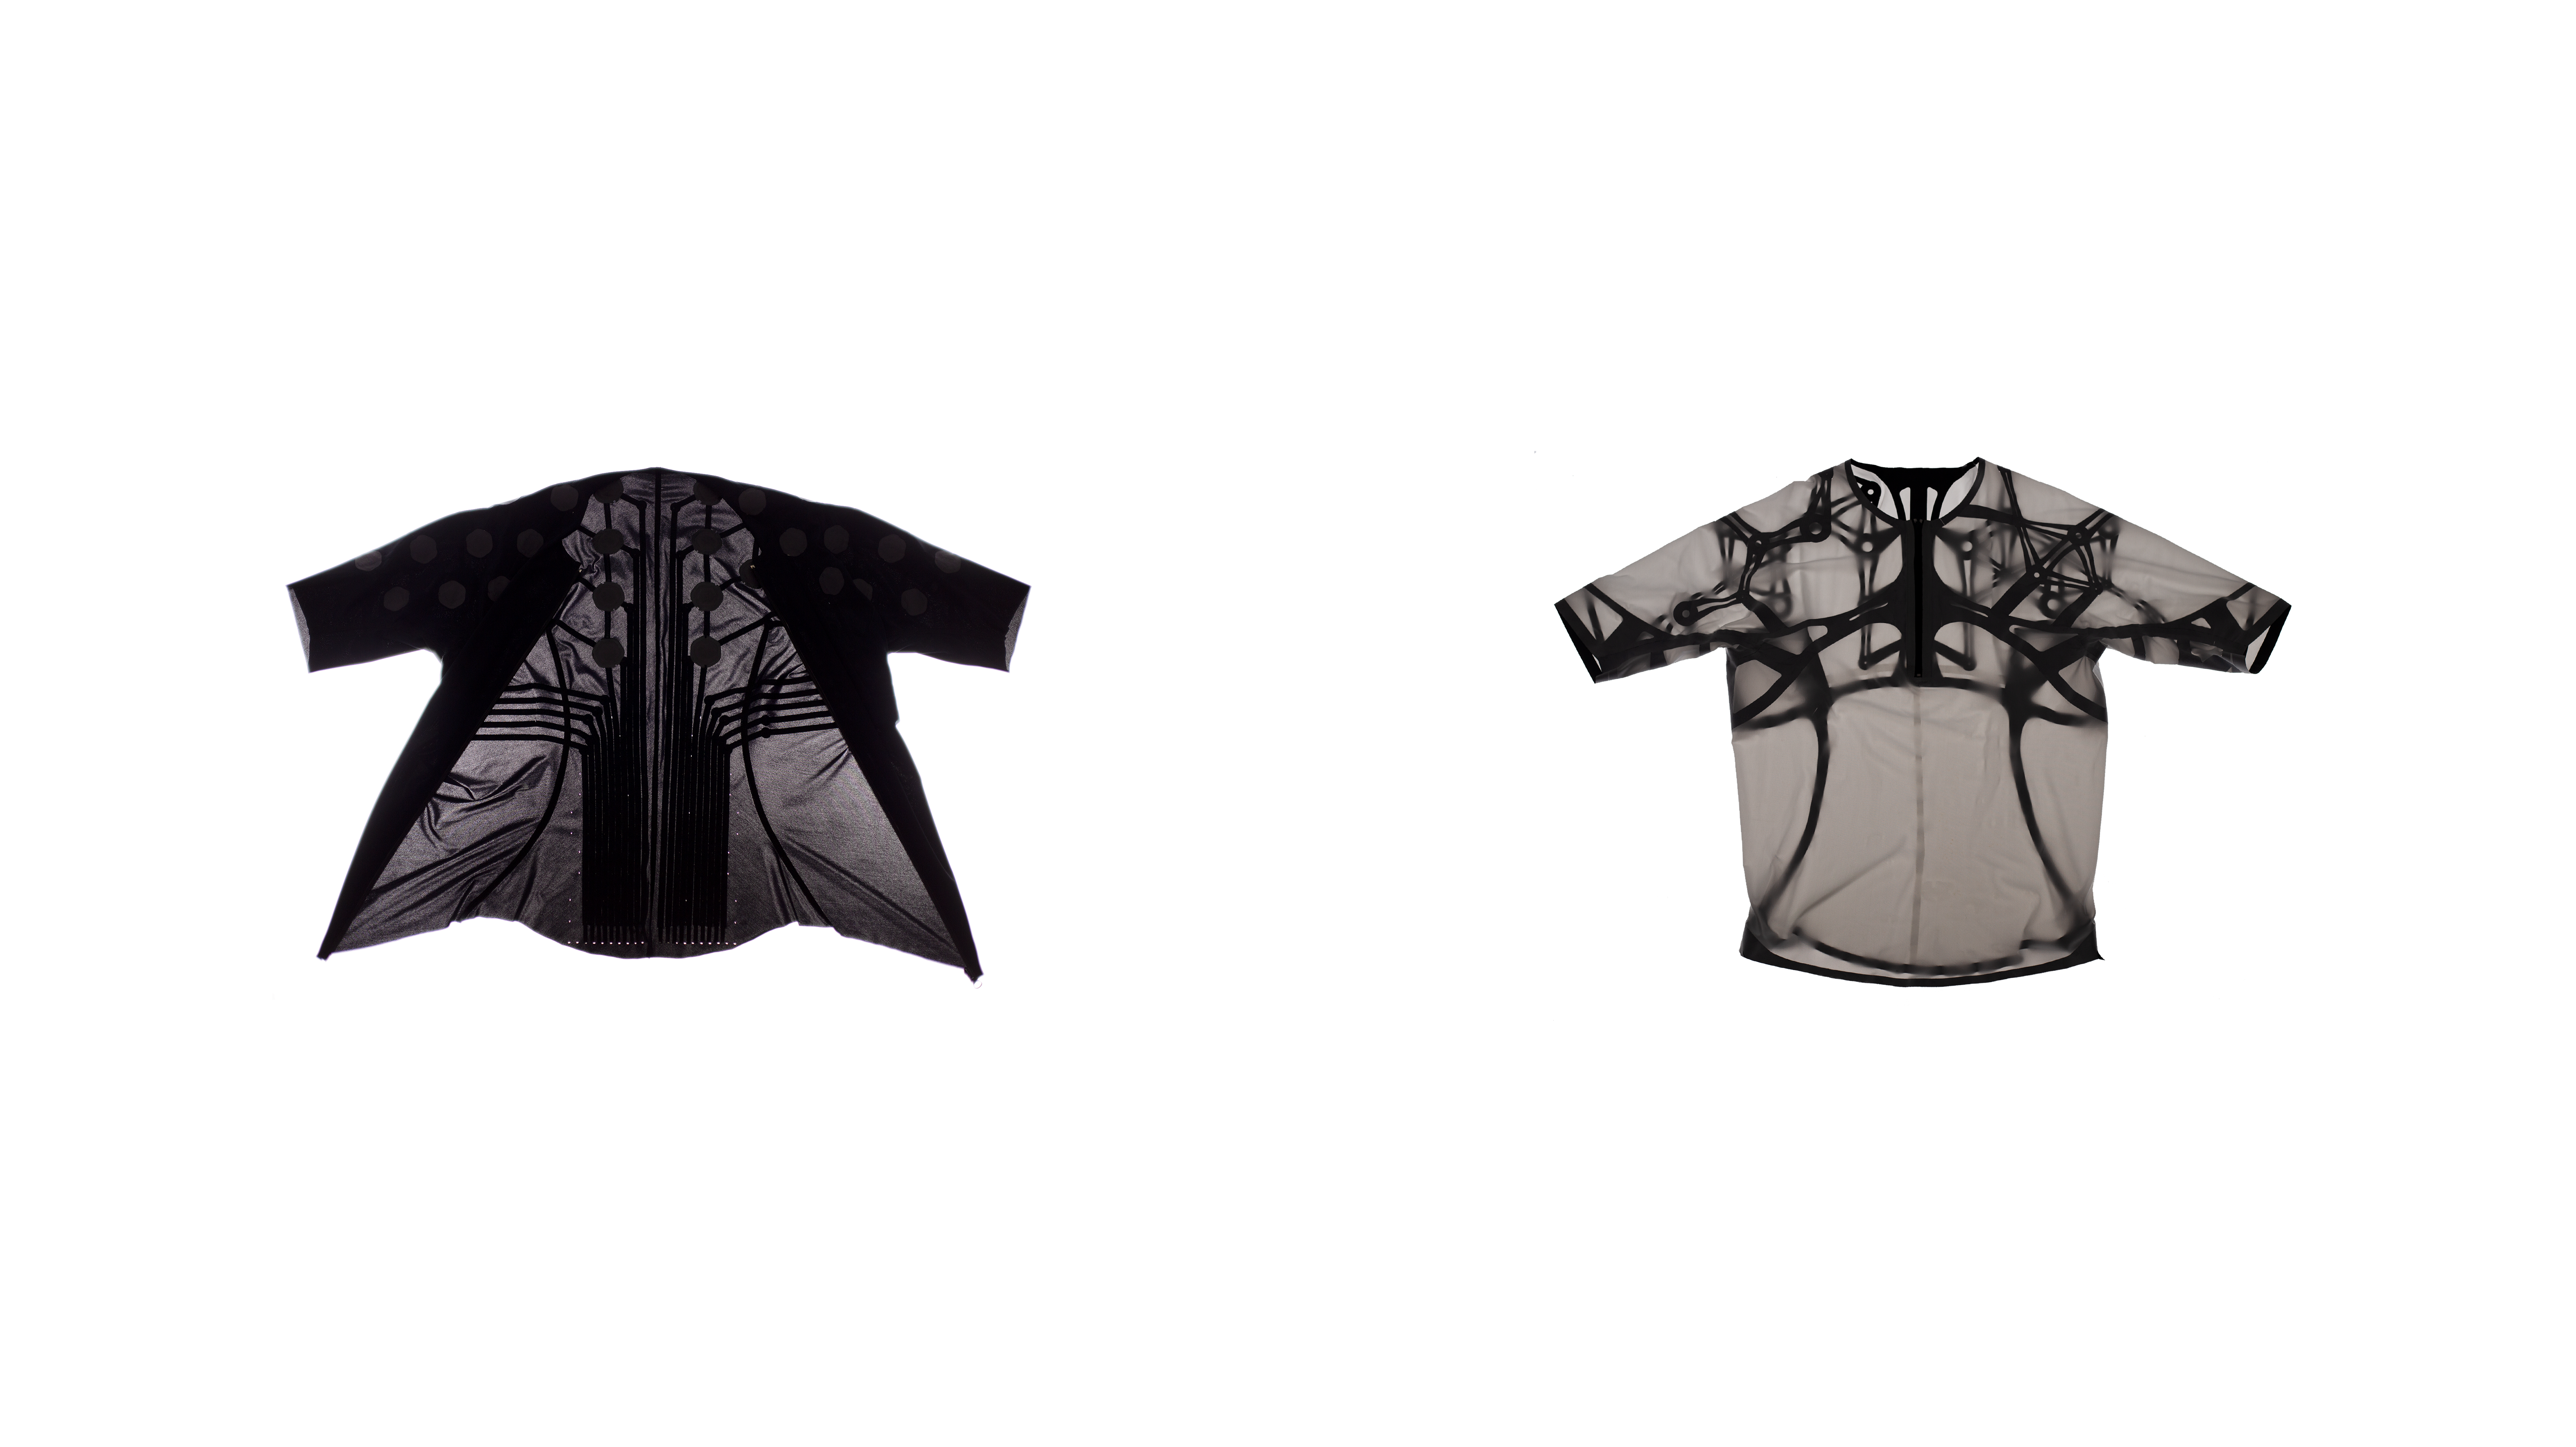 Image of a translucent black jacket and a translucent black short-sleeved top, side by side on a white background.